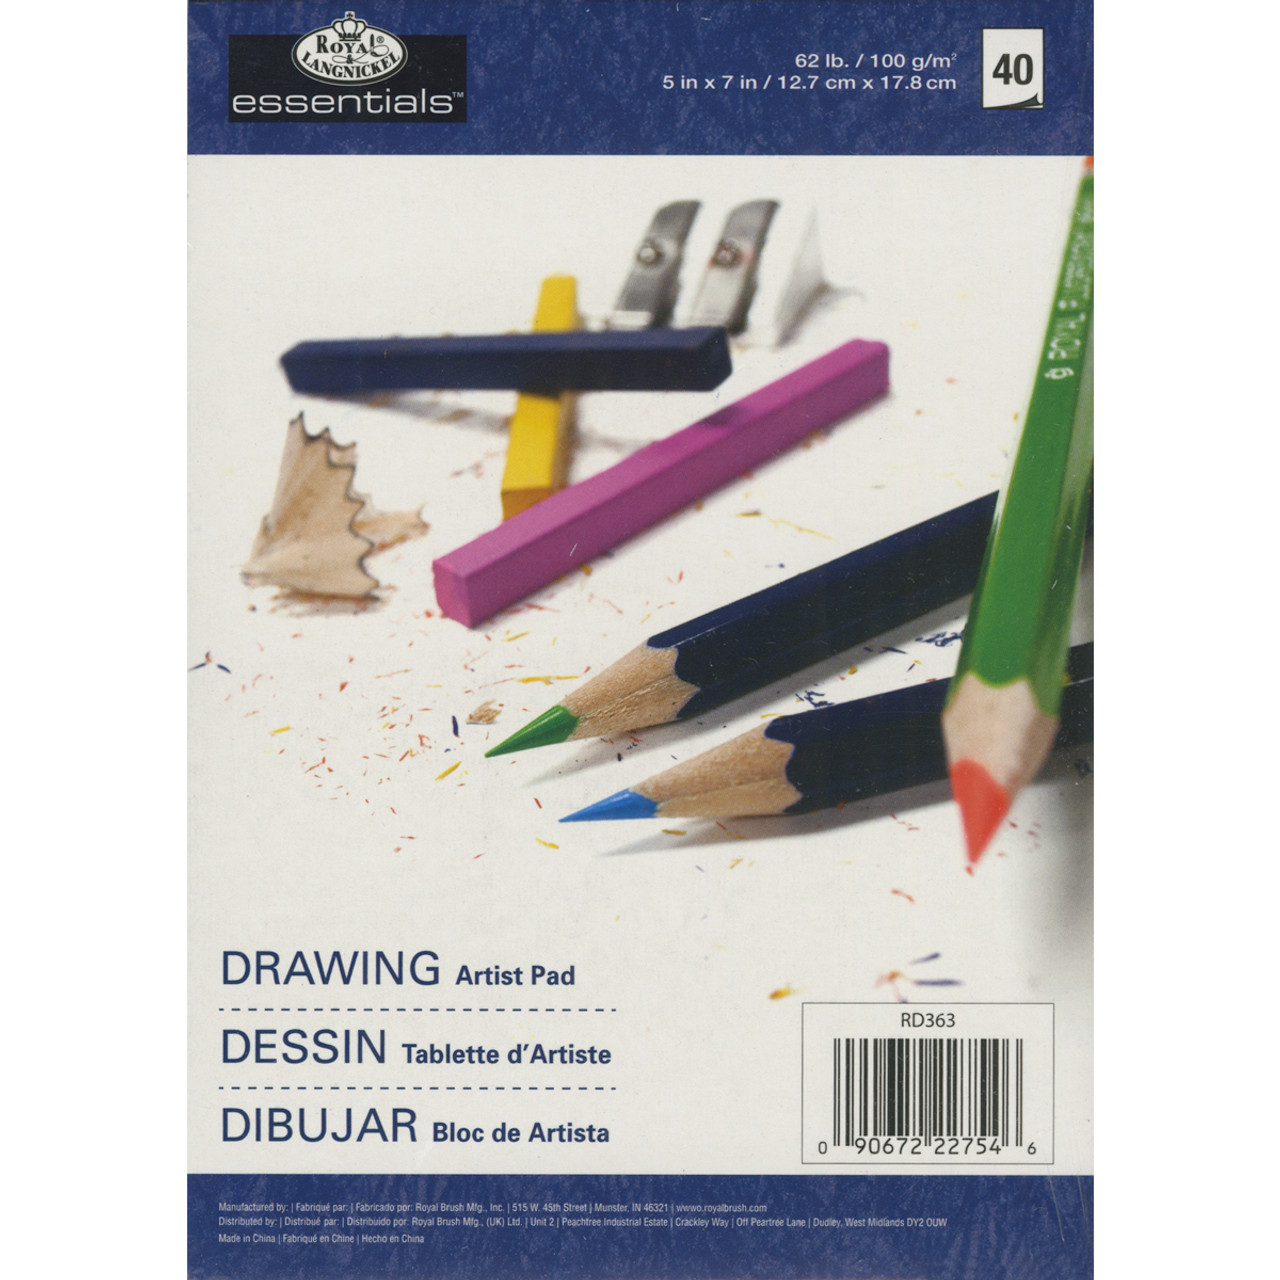 Sketch Pads - Pads & Copies - Paper Products - Stationery